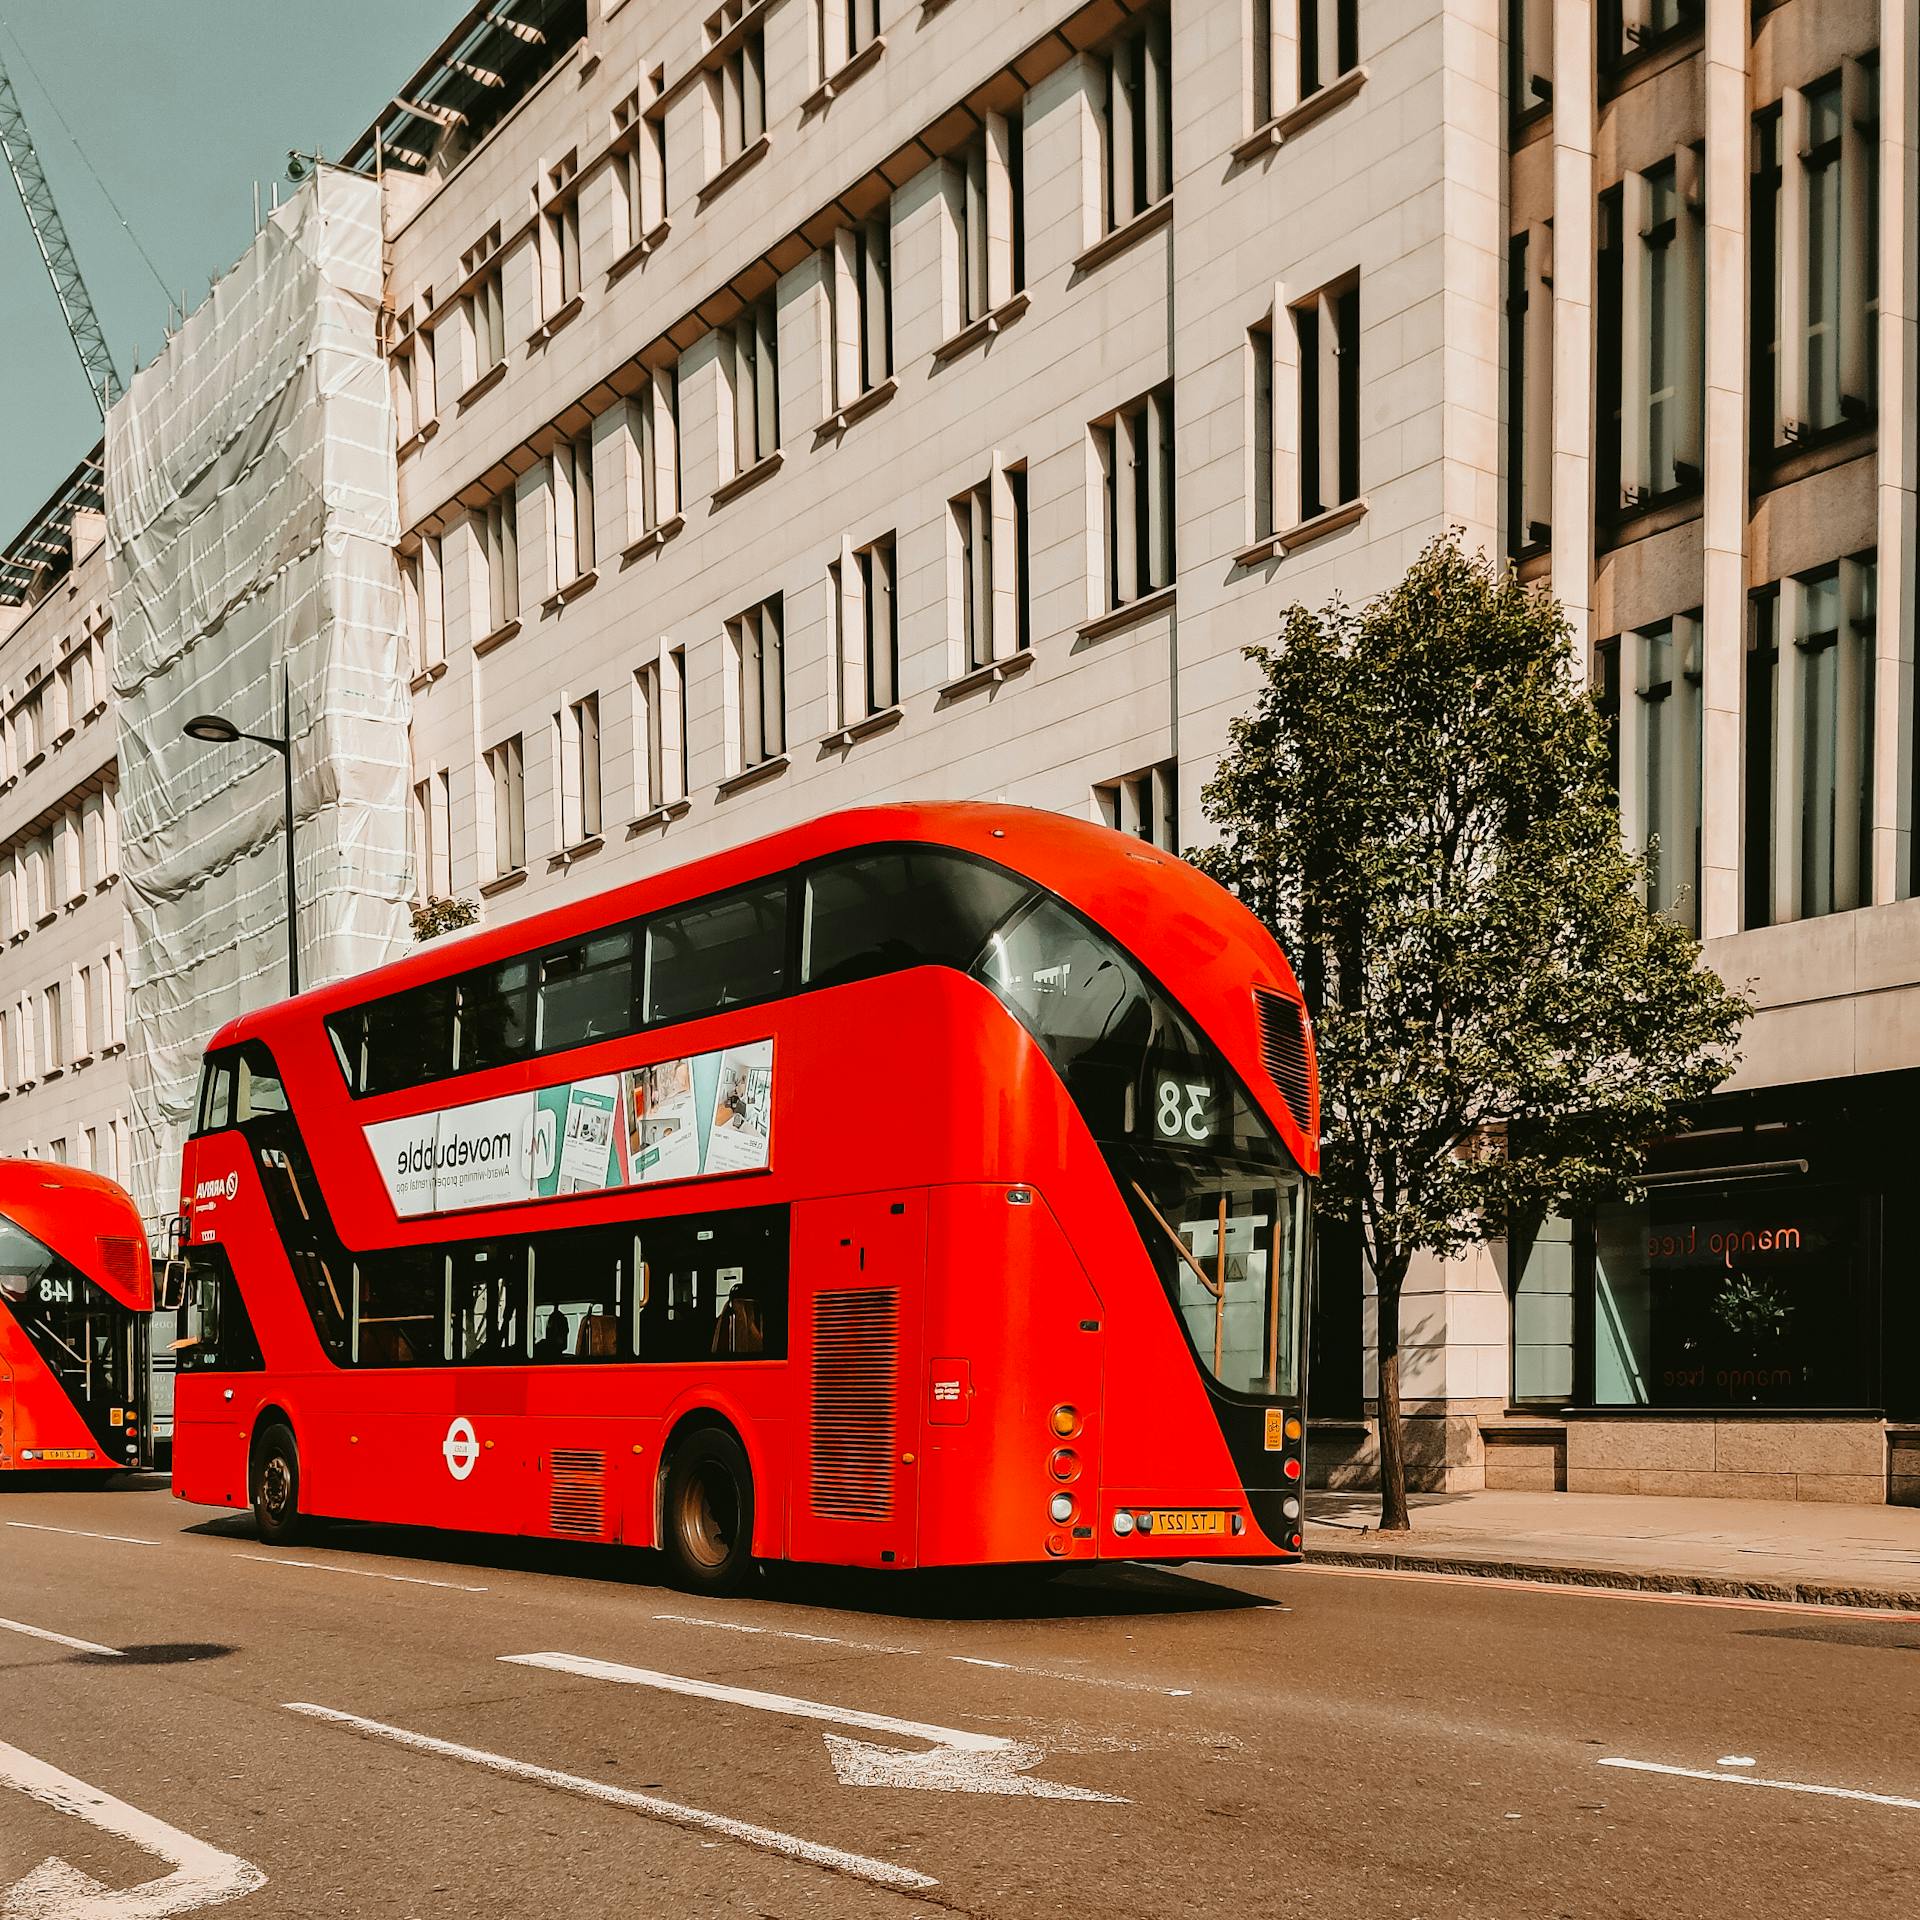 A red double-decker bus passing by a street in the city | Source: Pexels